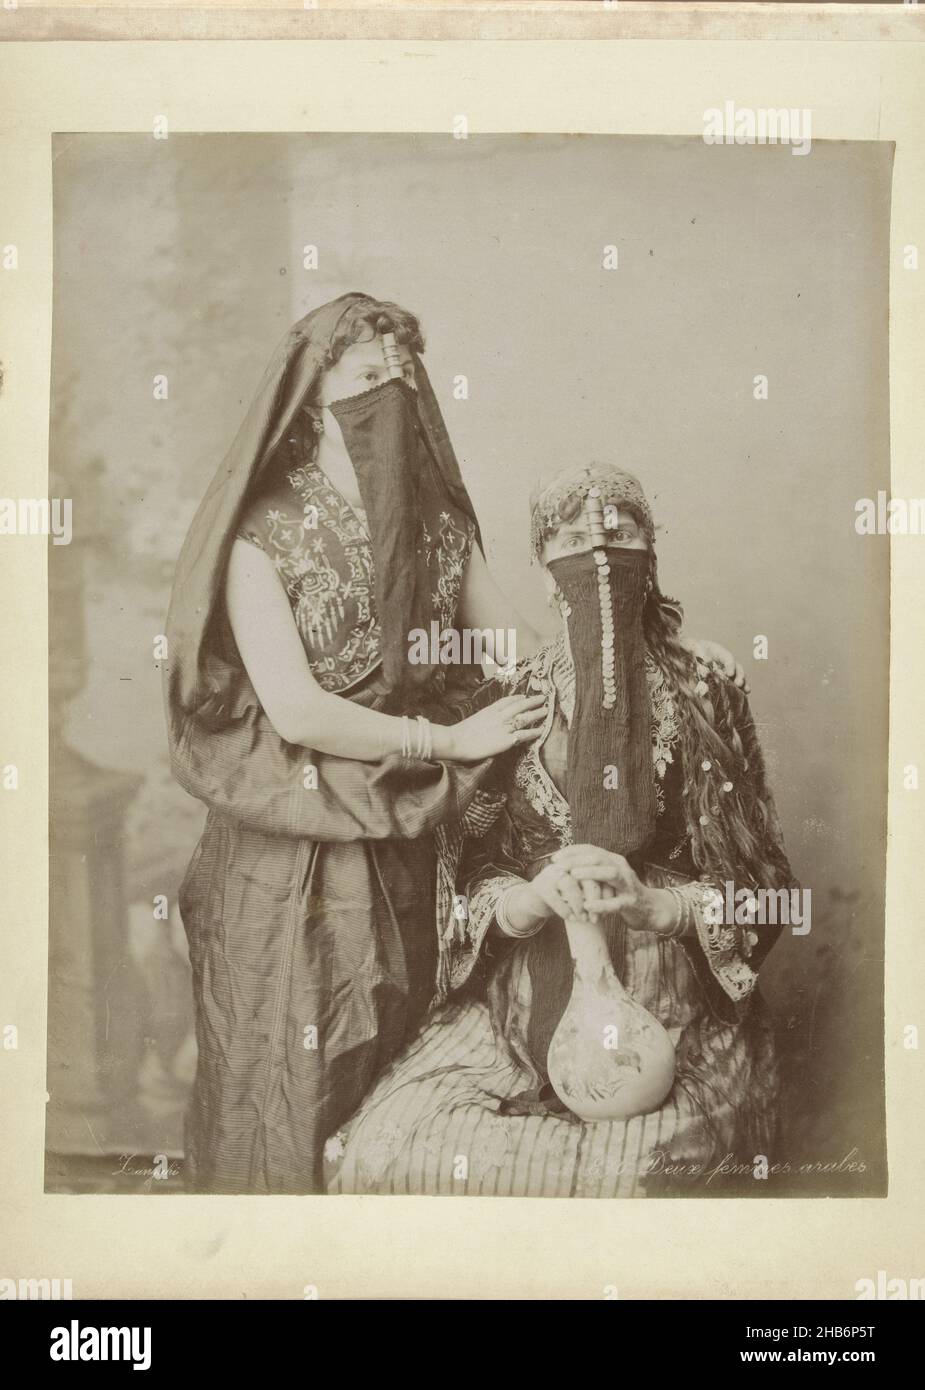 Portrait of two veiled women, No 810. Deux femmes arabes (title on object), They carry in front of face, from top of nose, a cloth, on lap one of them has an earthenware jug, Zangaki (mentioned on object), Egypte, c. 1895, photographic support, albumen print, height 277 mm × width 216 mmheight 277 mm × width 367 mm Stock Photo